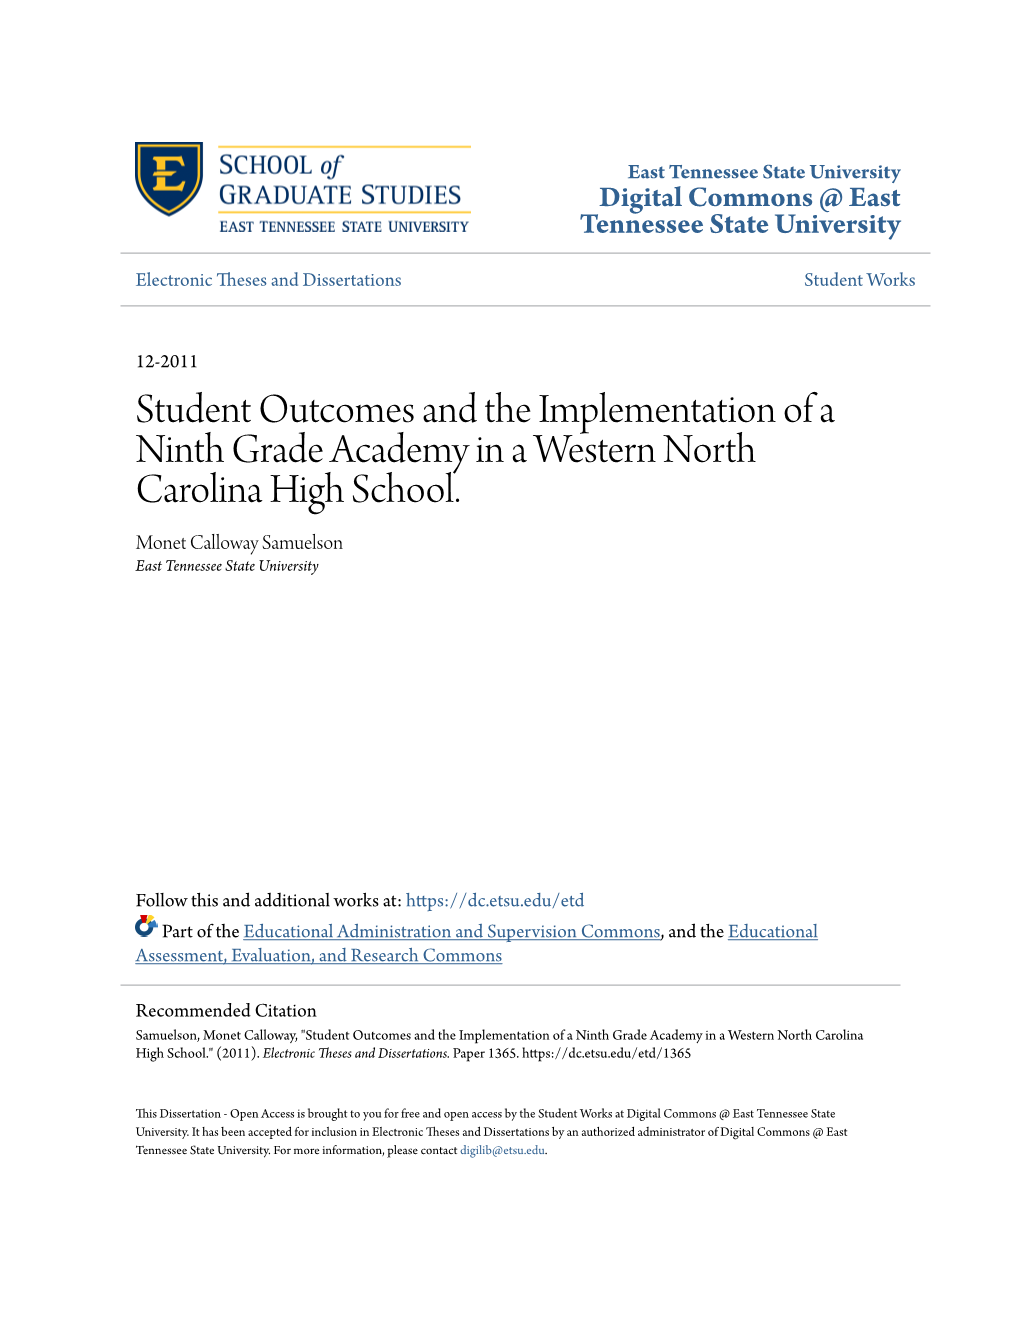 Student Outcomes and the Implementation of a Ninth Grade Academy in a Western North Carolina High School